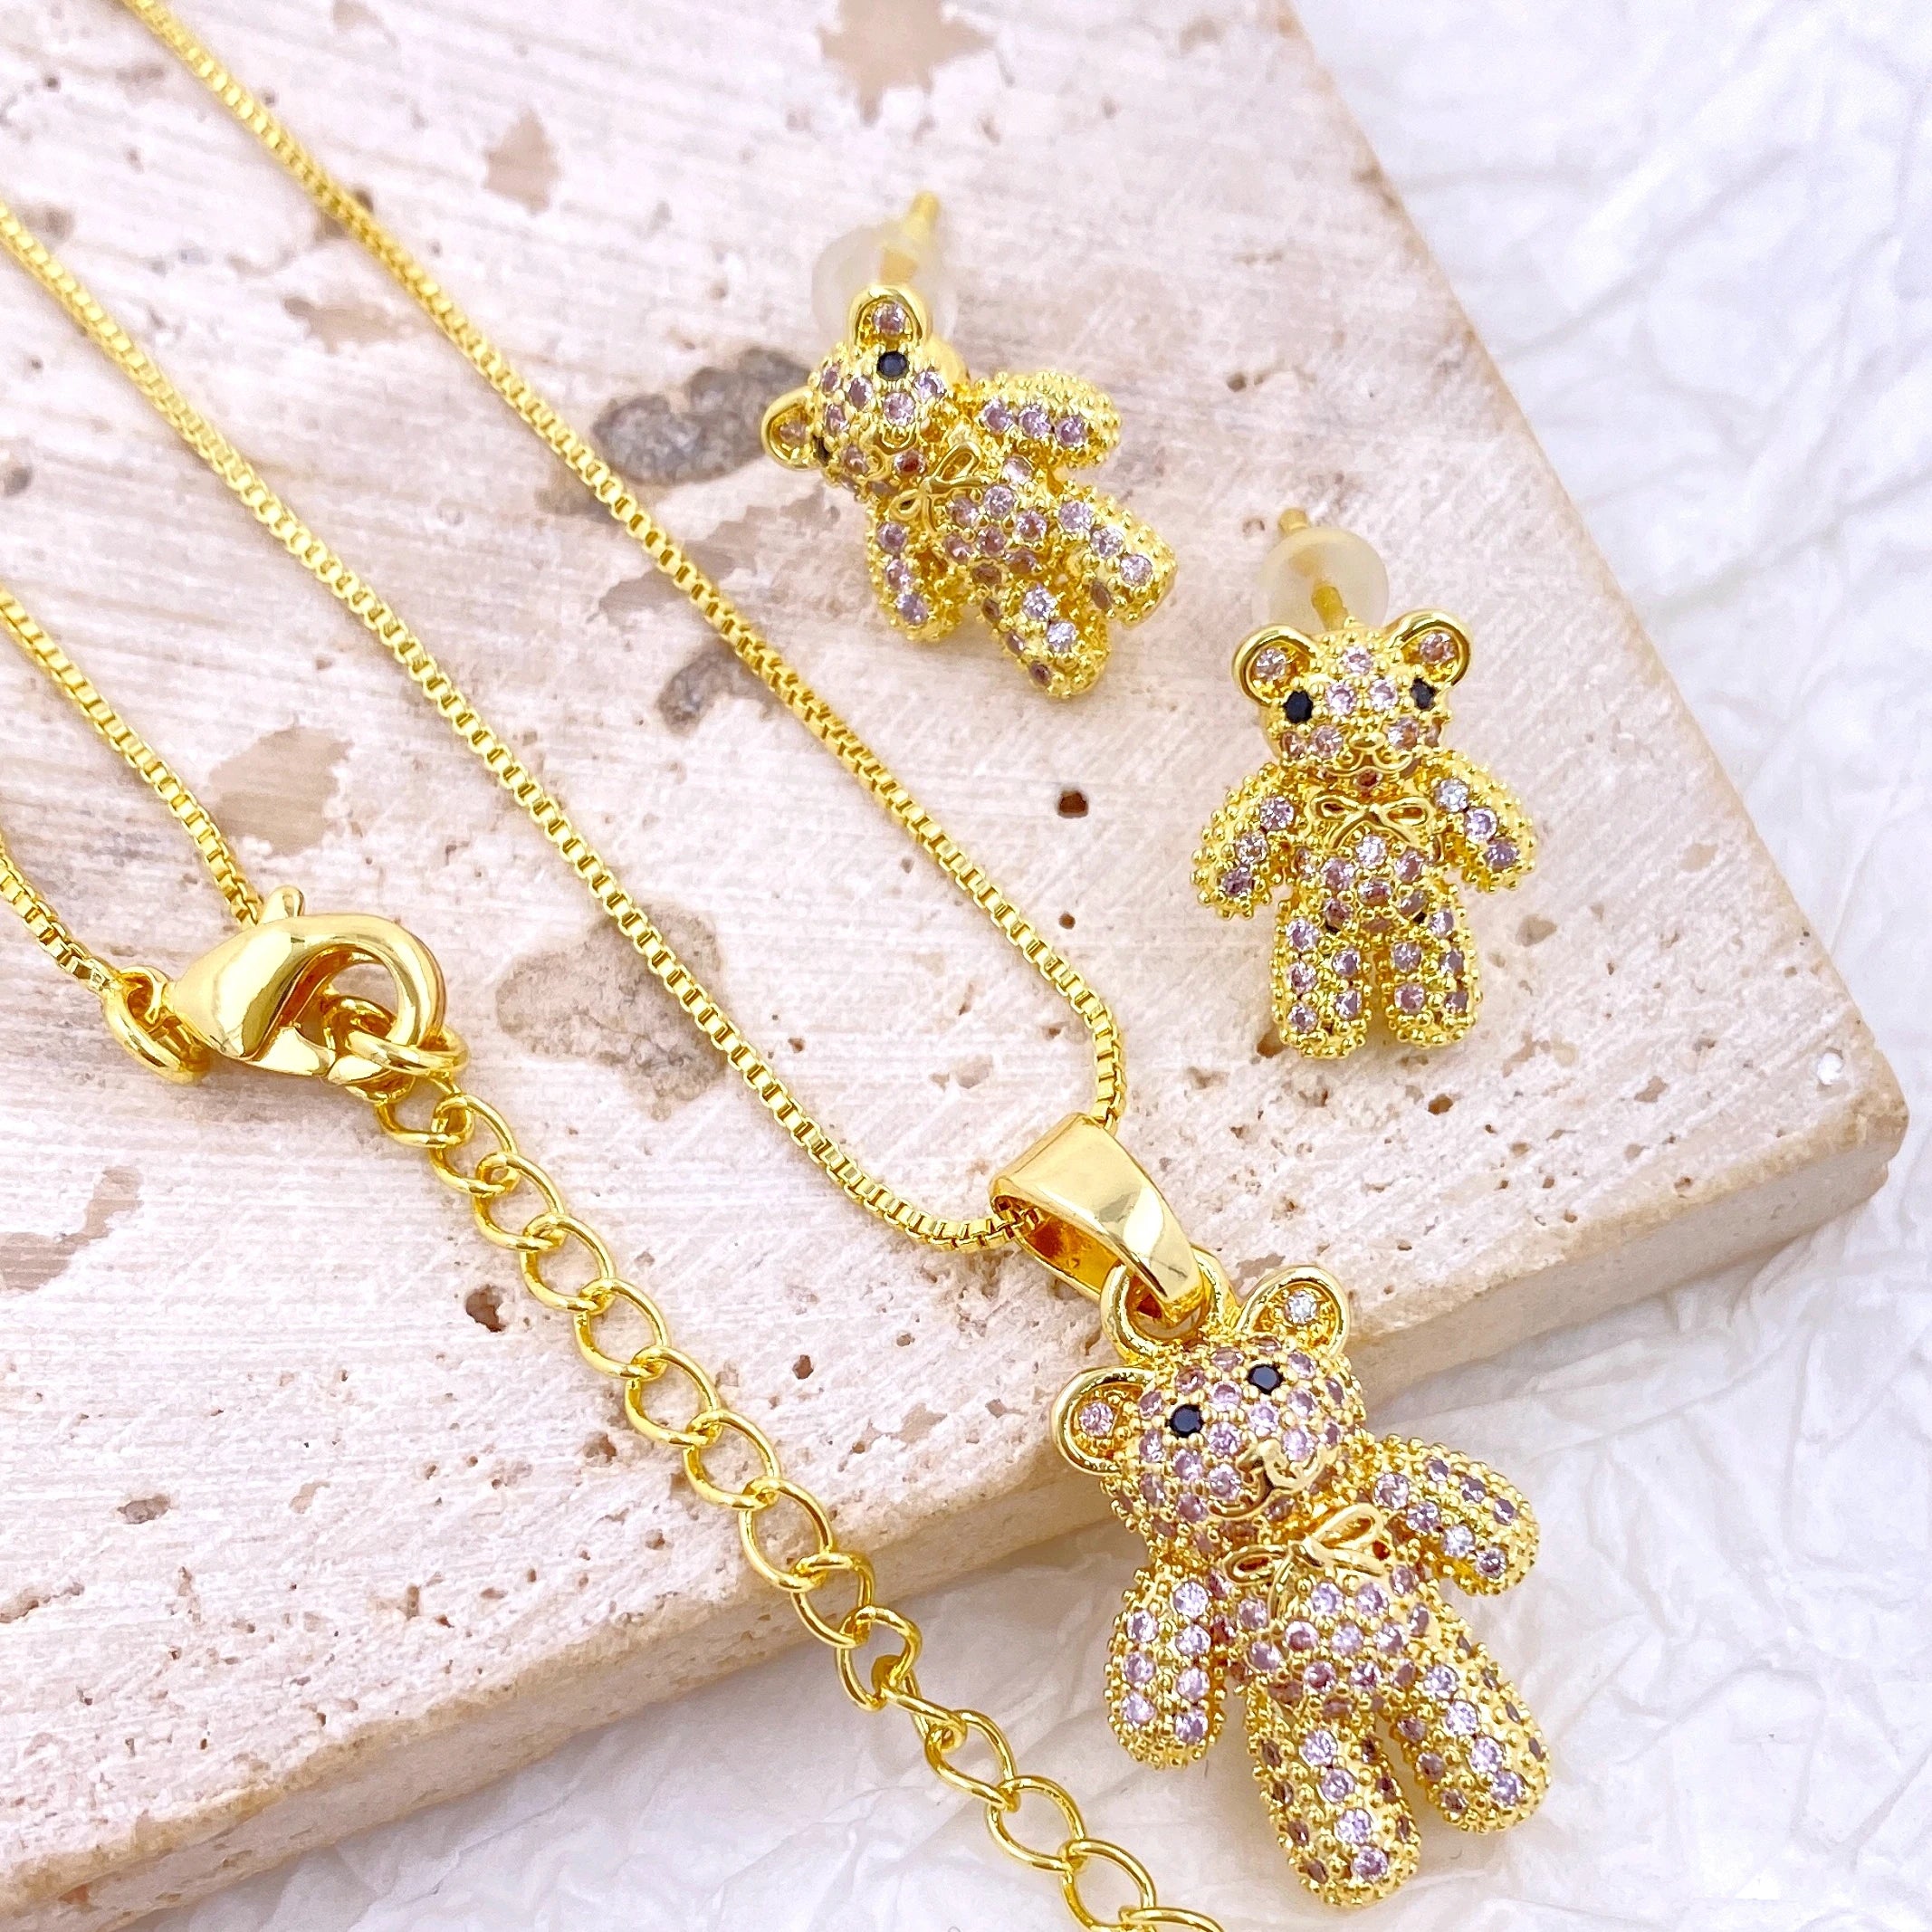 Teddy Bear Treasure: Chic Cubic Zirconia Stud Earrings and Pendant Necklace Set for Kids!